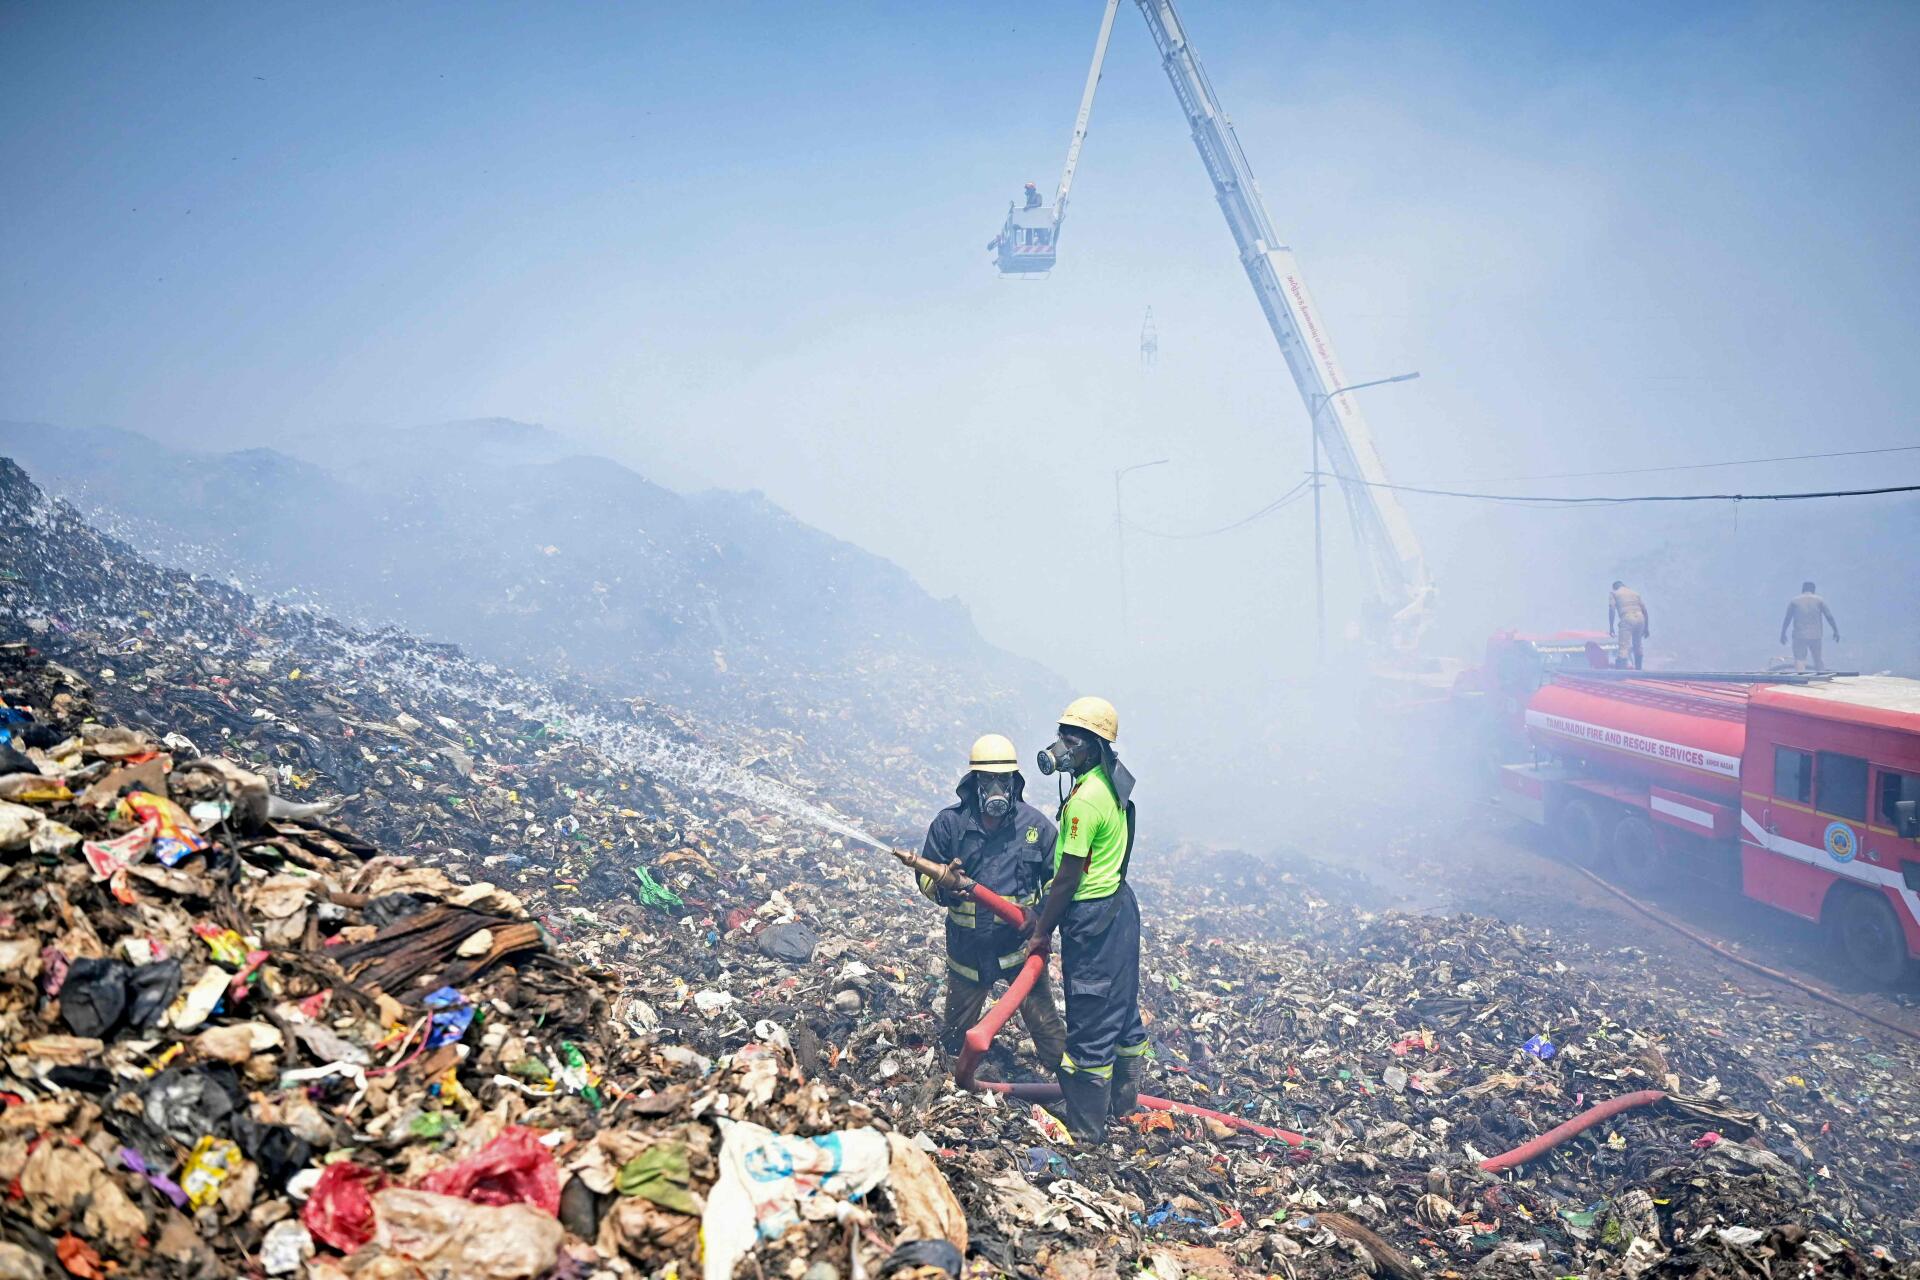 Firefighters try to extinguish burning waste after a fire broke out at the Perungudi landfill site in Chennai, Tamil Nadu, on April 29, 2022.